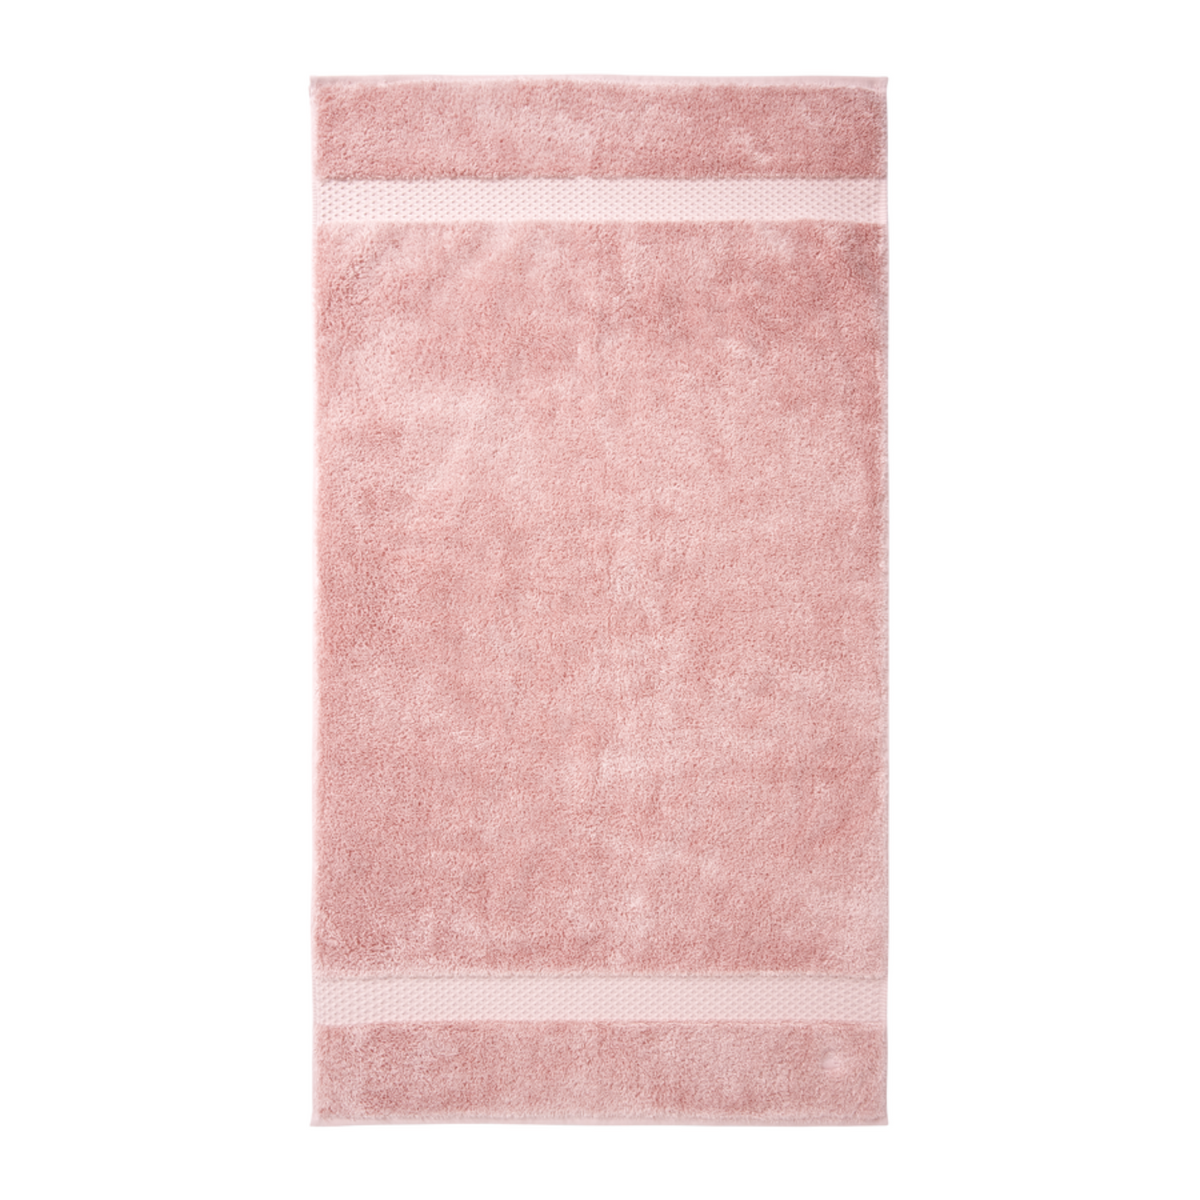 Guest Towel of Yves Delorme Etoile Bath Collection in The Rose Color